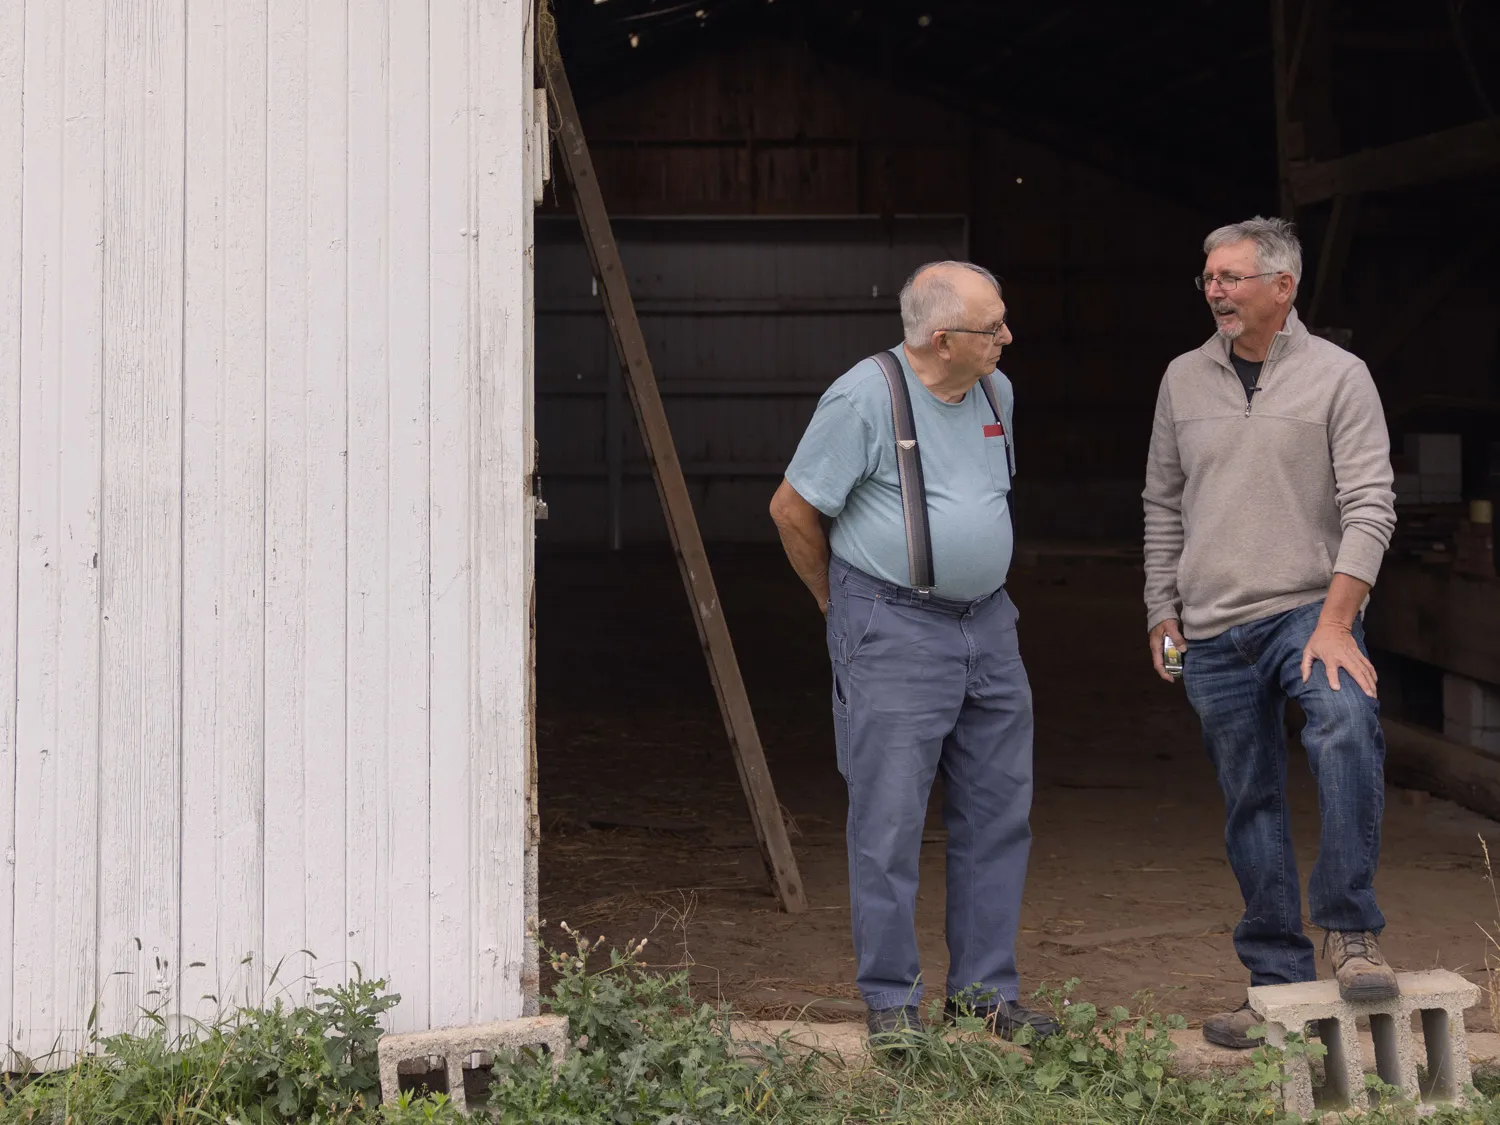 Two men stand chatting just inside opened barn doors. One is an older man wearing suspenders who owns the barn; the other is Doug Morgan who makes a living renovating barns and turning them into beautiful places for people to gather.